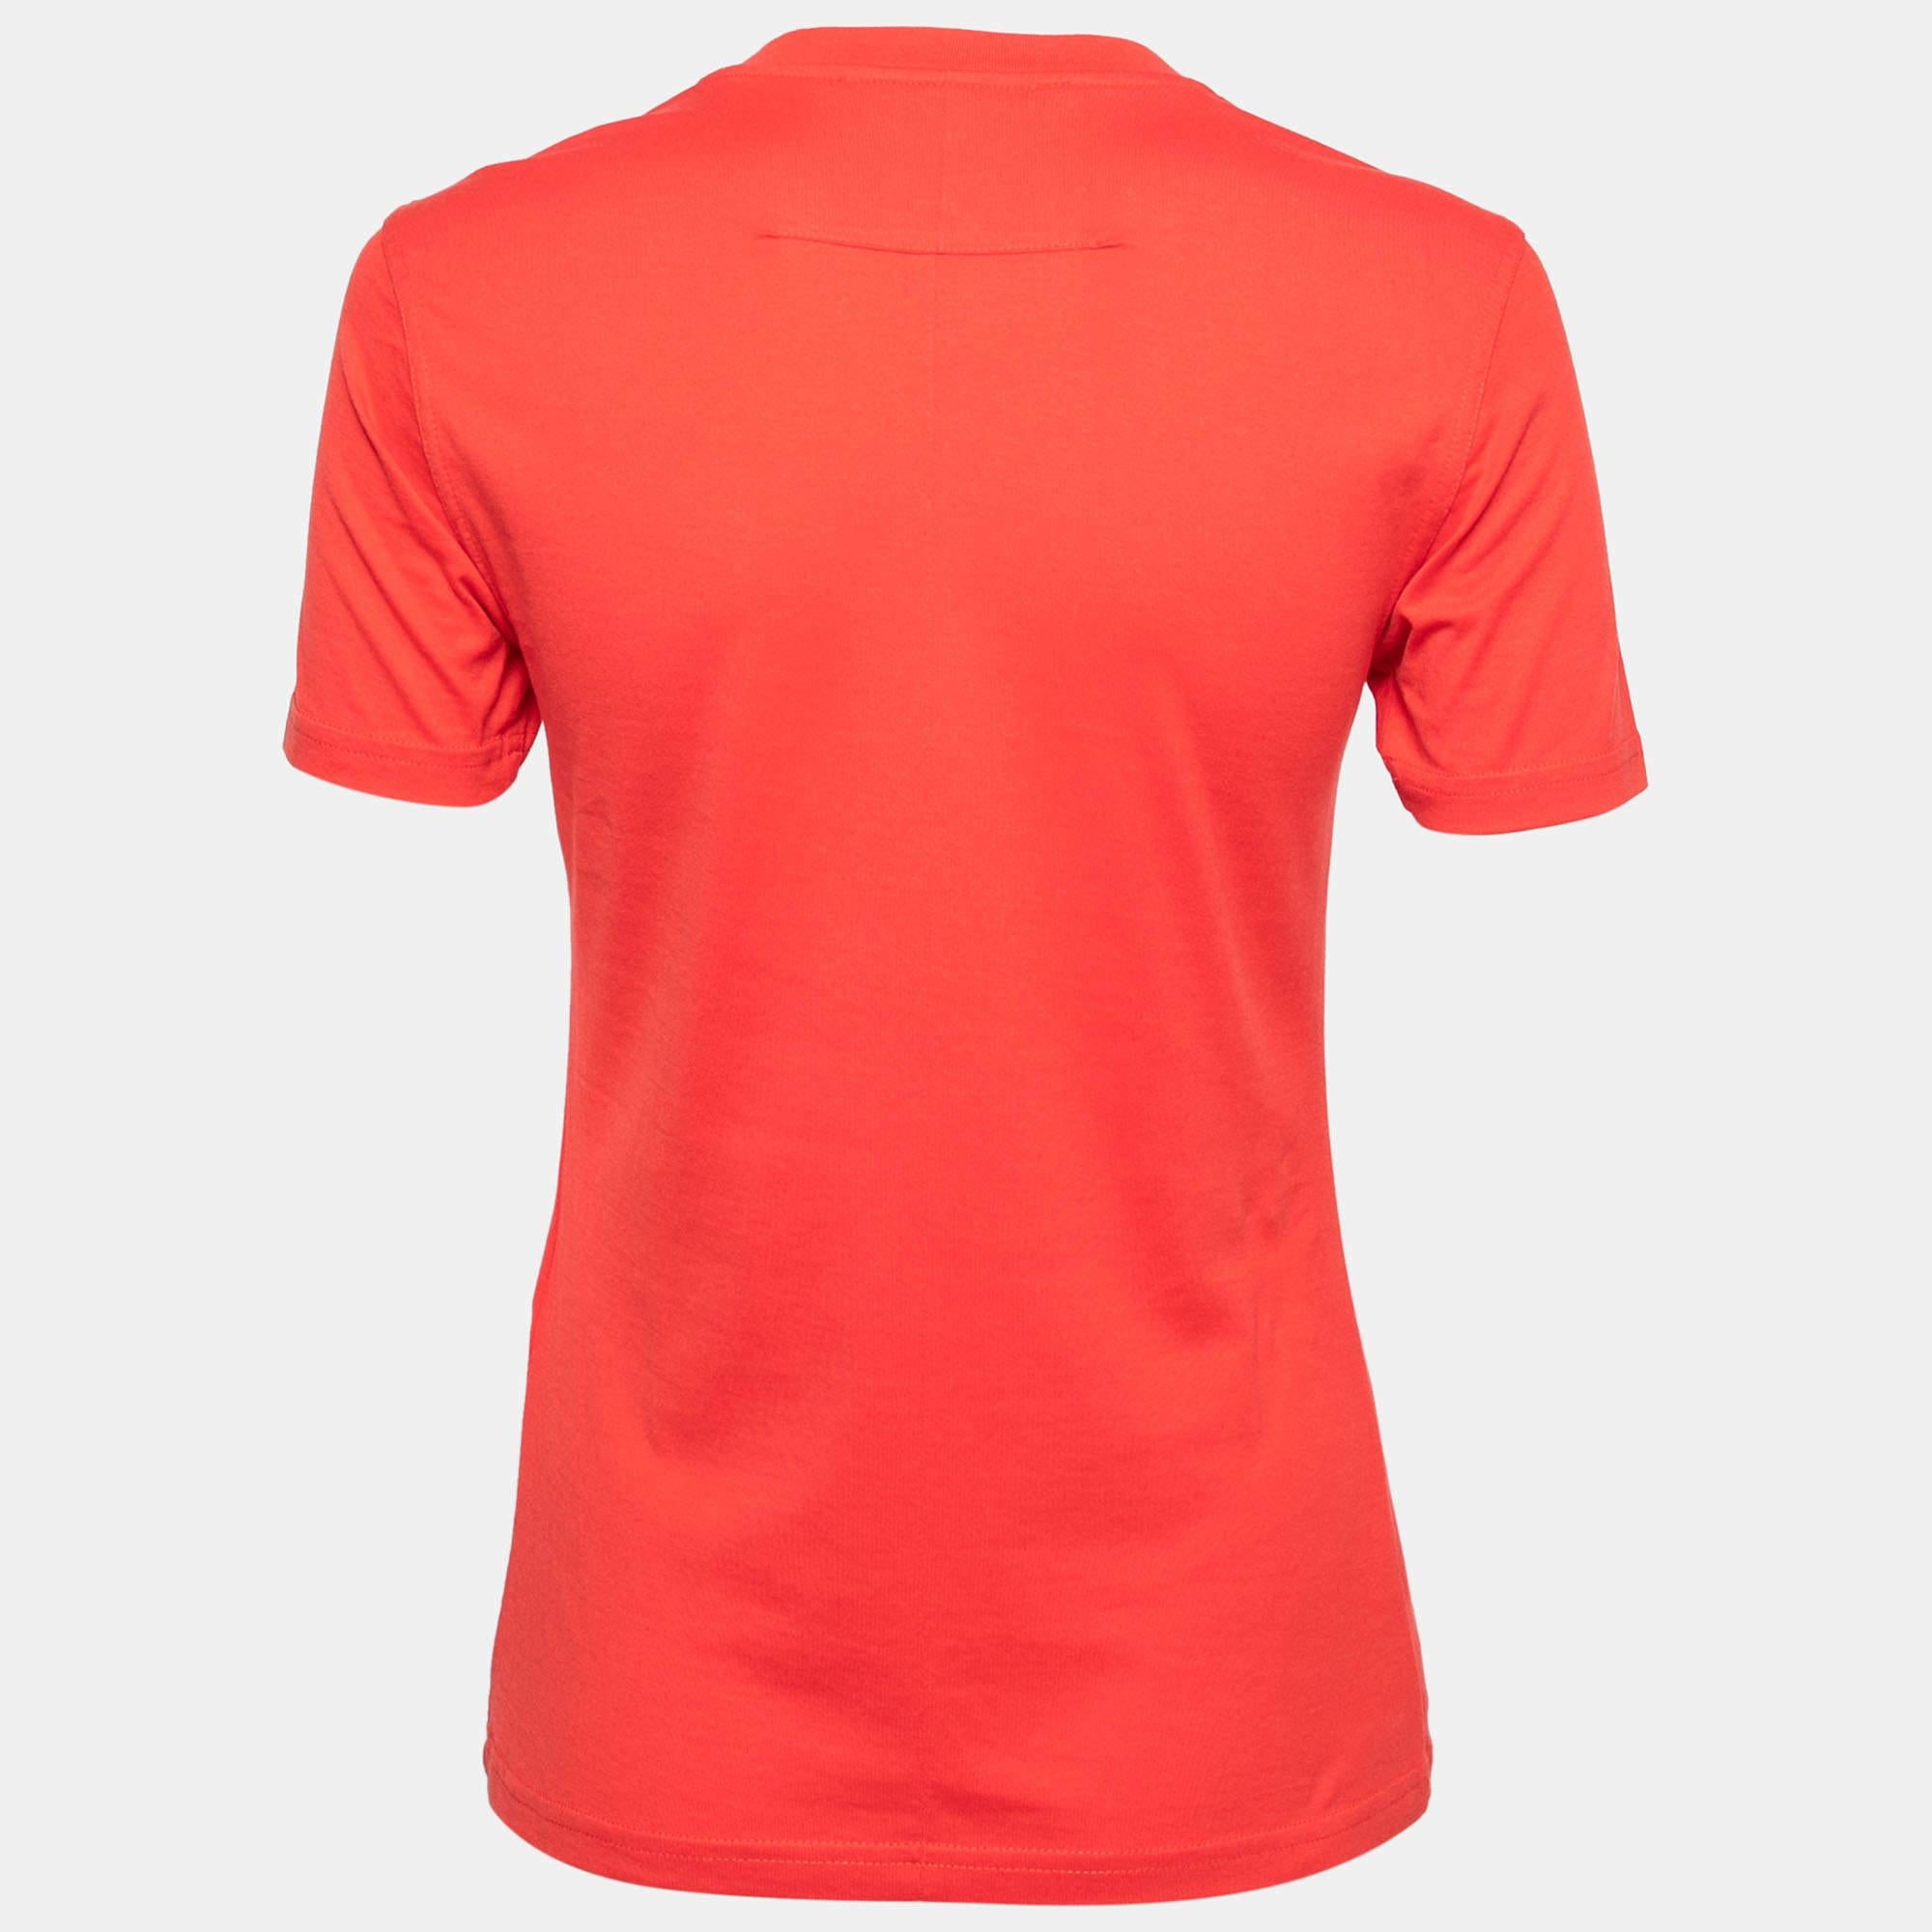 Givenchy brings you a simple t-shirt elevated by the iconic star logo on the front. It has been tailored from cotton in a red shade and features short sleeves. Style the creation with sneakers and denim pants for a cool and casual look.

